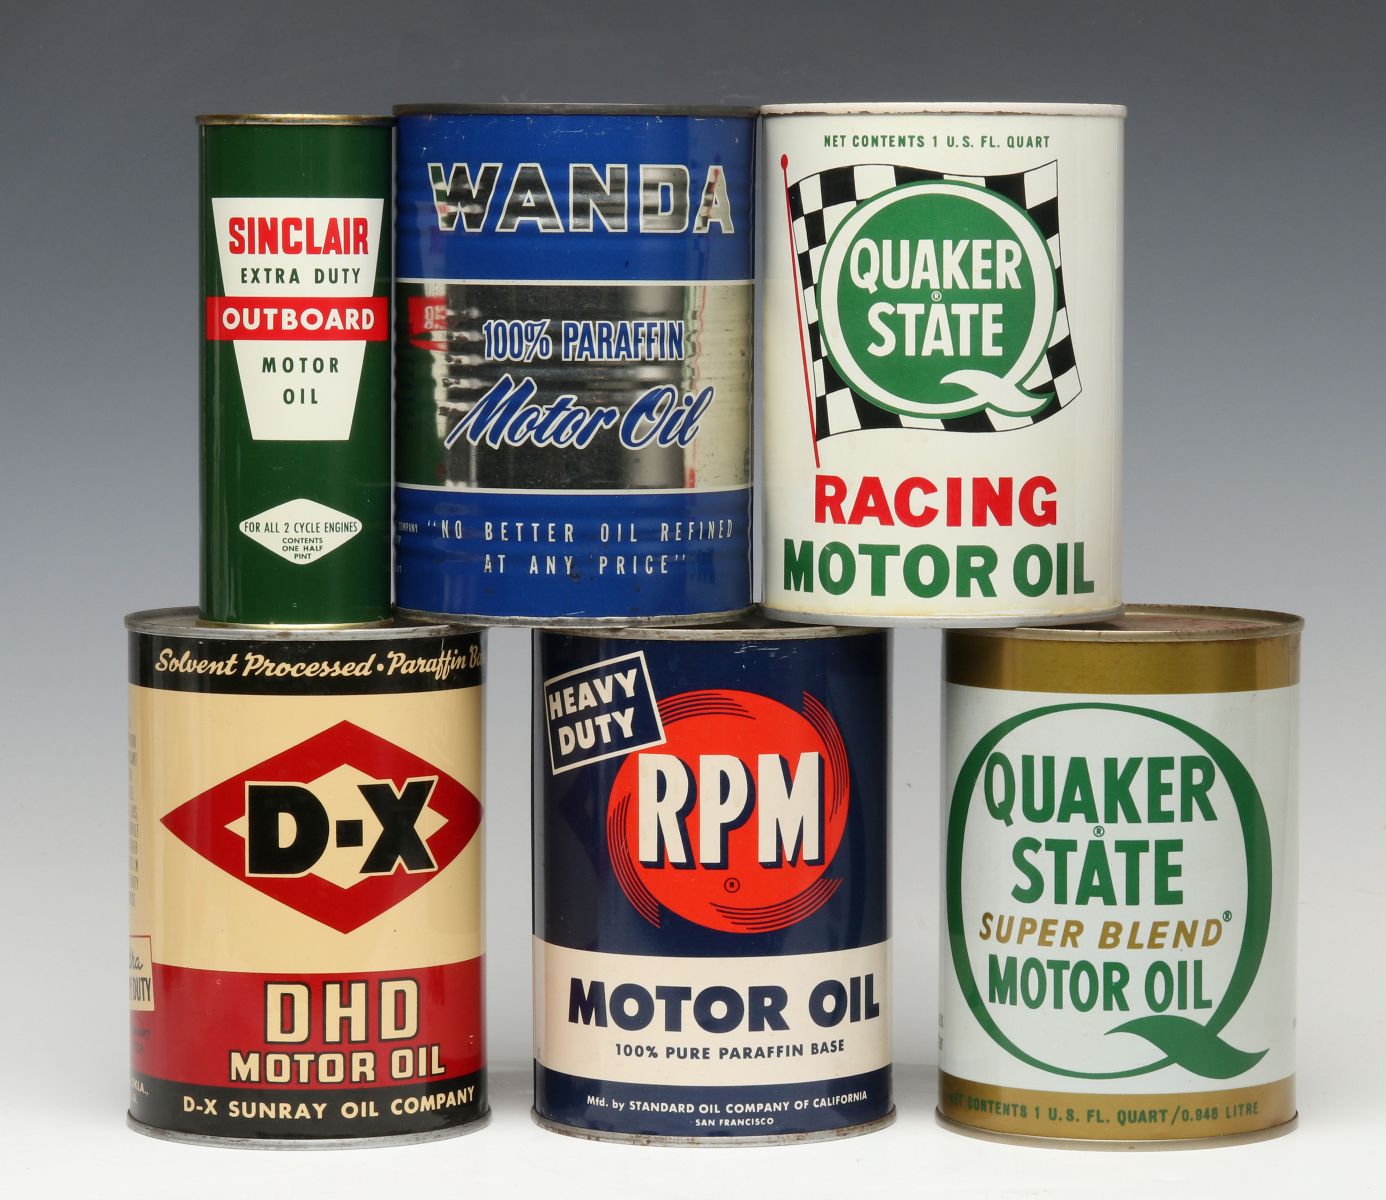 A GROUP OF VINTAGE MOTOR OIL CANS WITH ADVERTISING